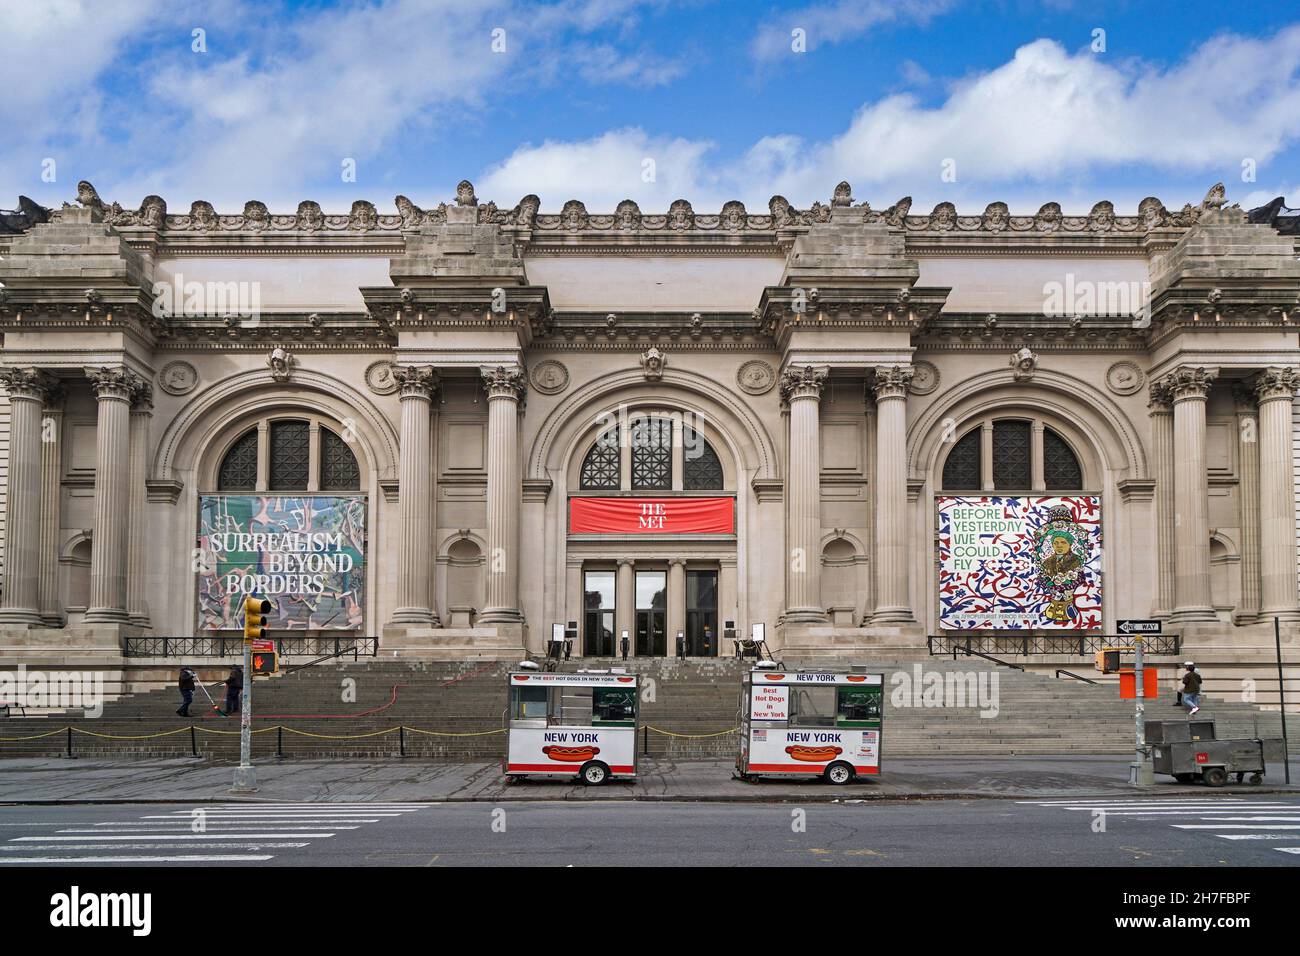 New York City, USA - November 17, 2021:  The classical architecture of the Fifth Avenue frontage of the Metropolitan Museum of Art Stock Photo